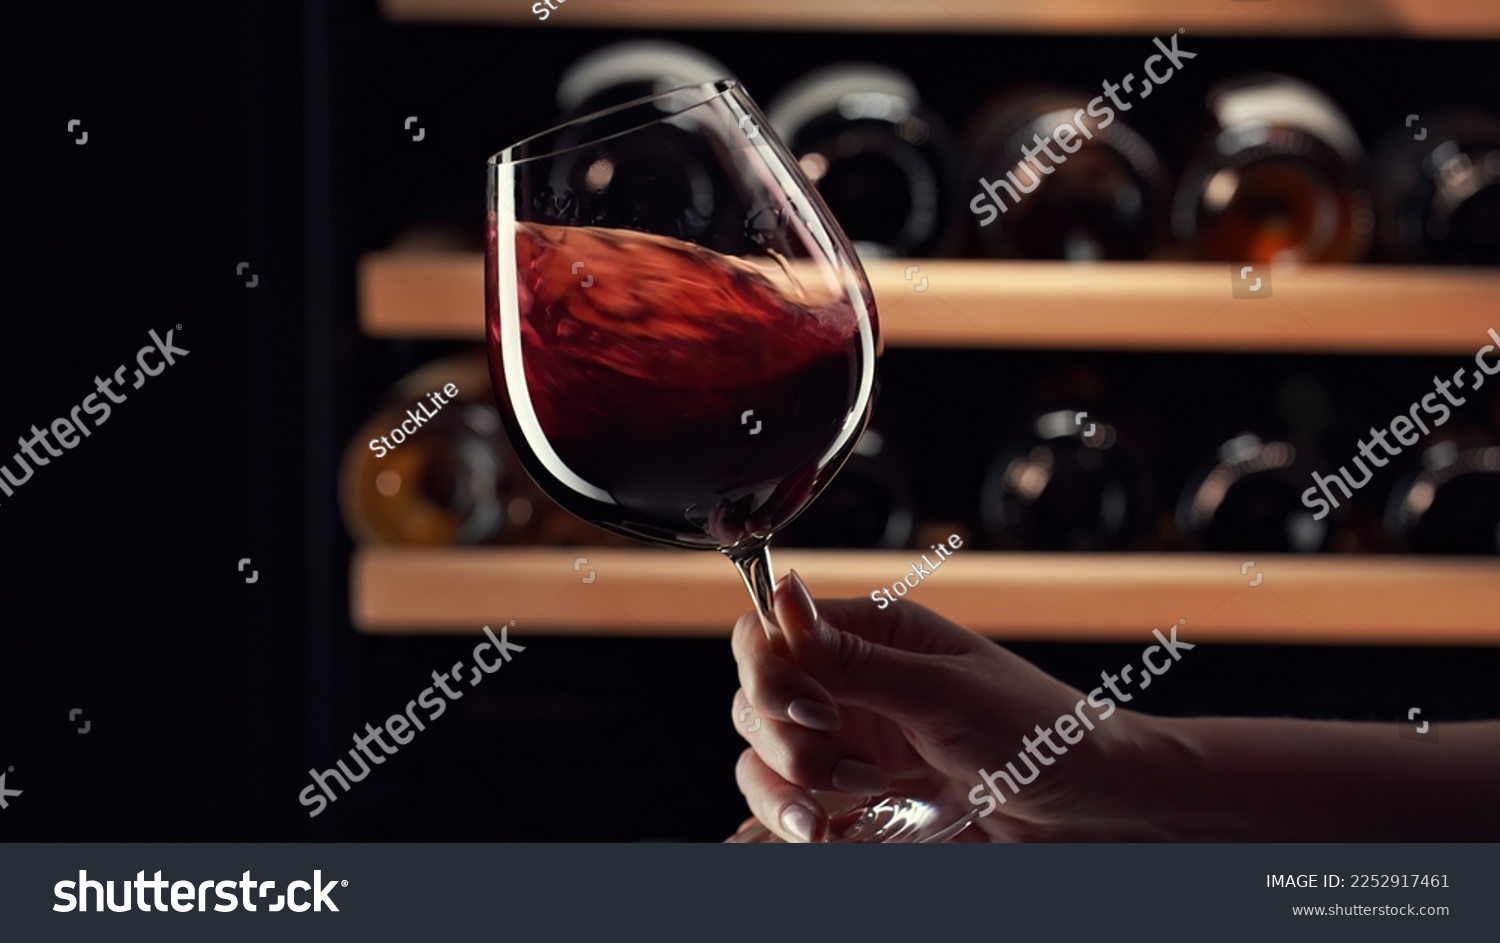 Close up female hand swirling red wine in wine glass. Wine expert tasting, rating and drinking wine, bottles in background. #2252917461